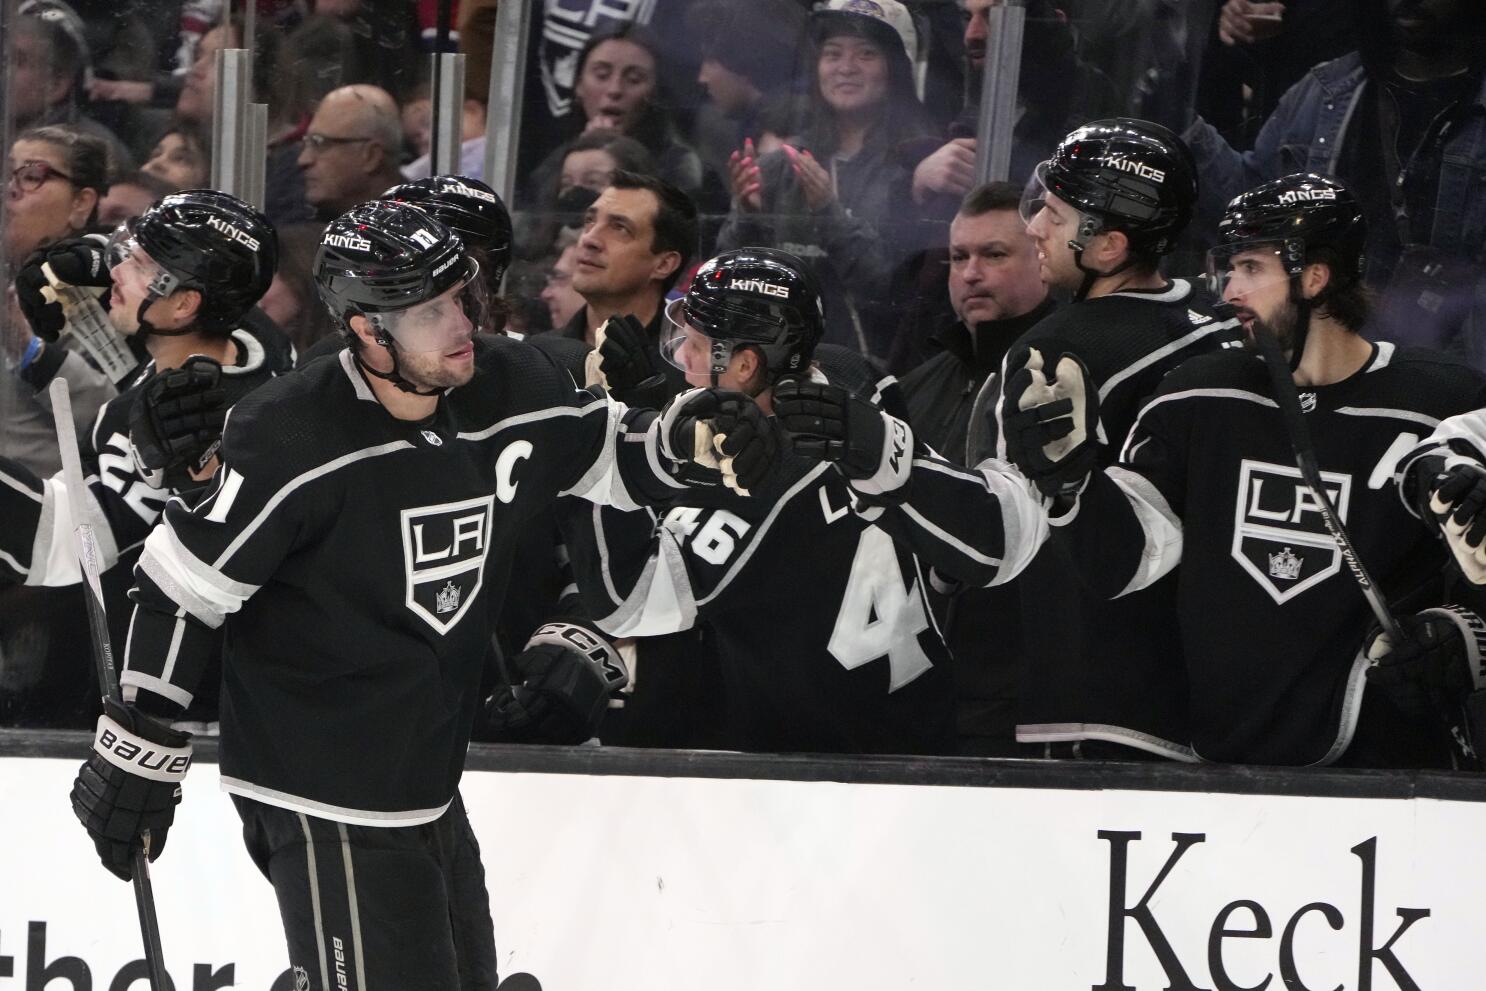 Kopitar scores 4 as Kings complete come-from-behind win over Jets